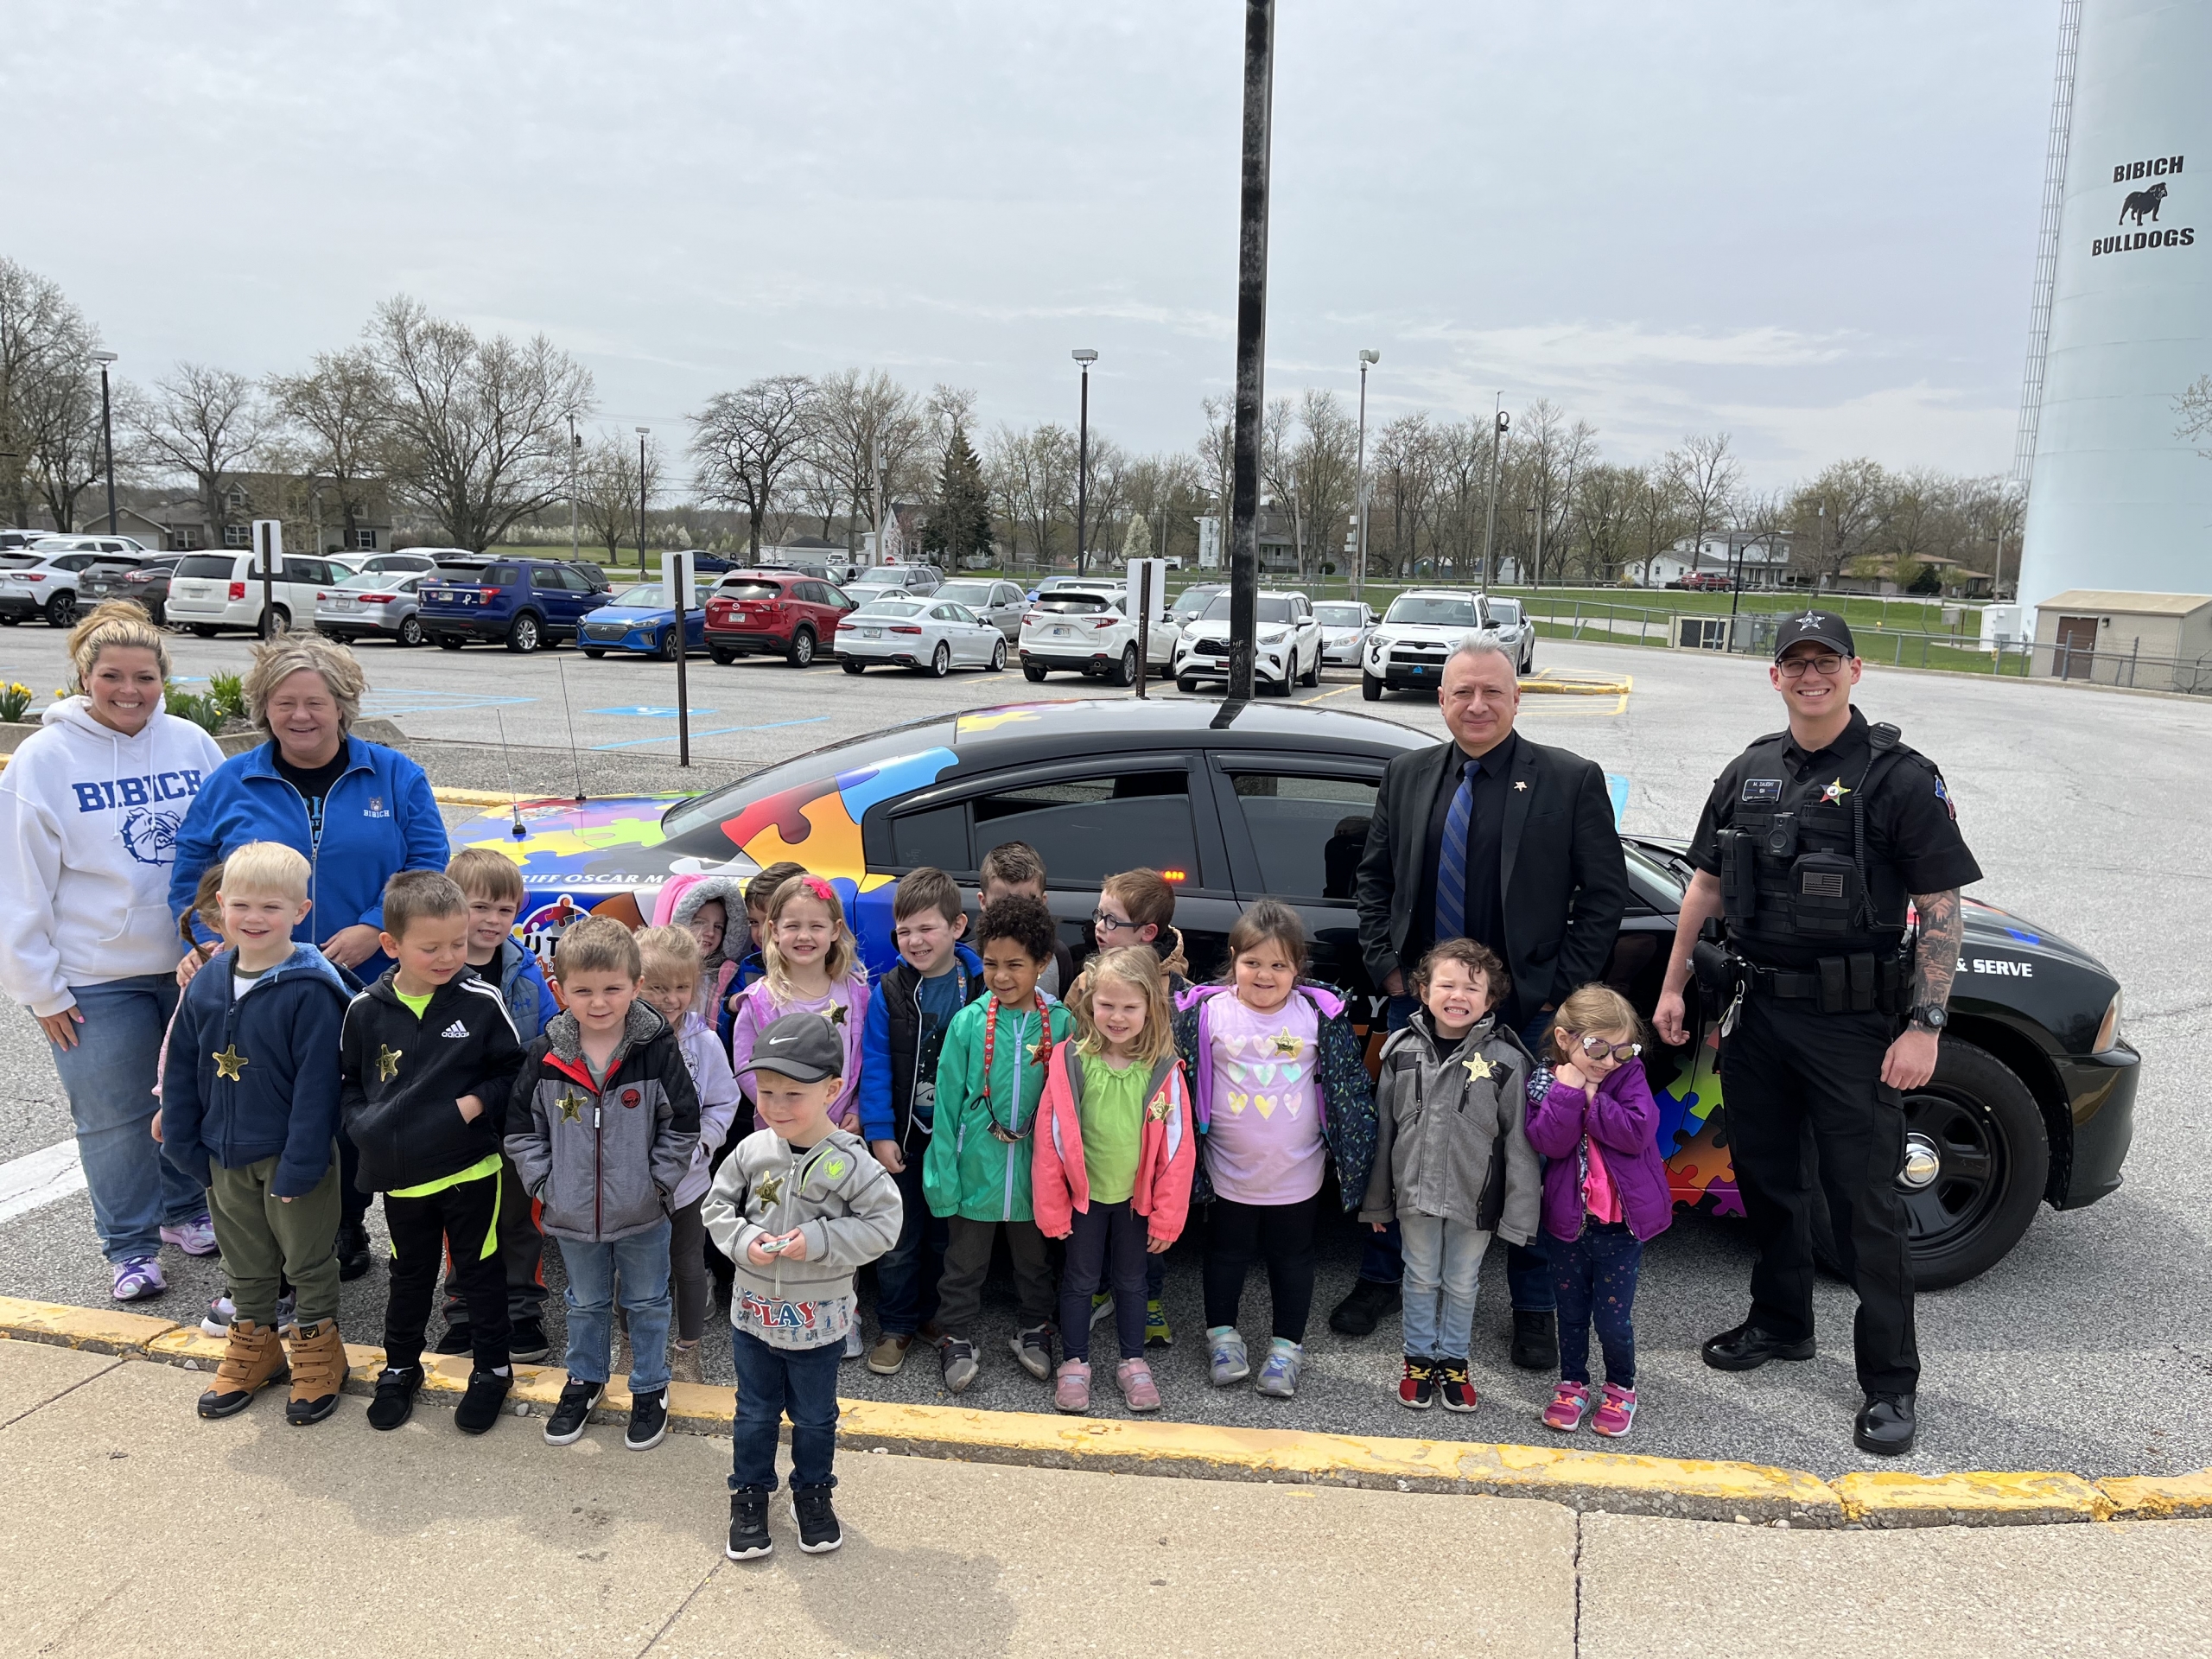 Early Childhood classes at Bibich had a visit from Sheriff Martinez and Officer Zalesky. They got to see the Autism Awareness car.